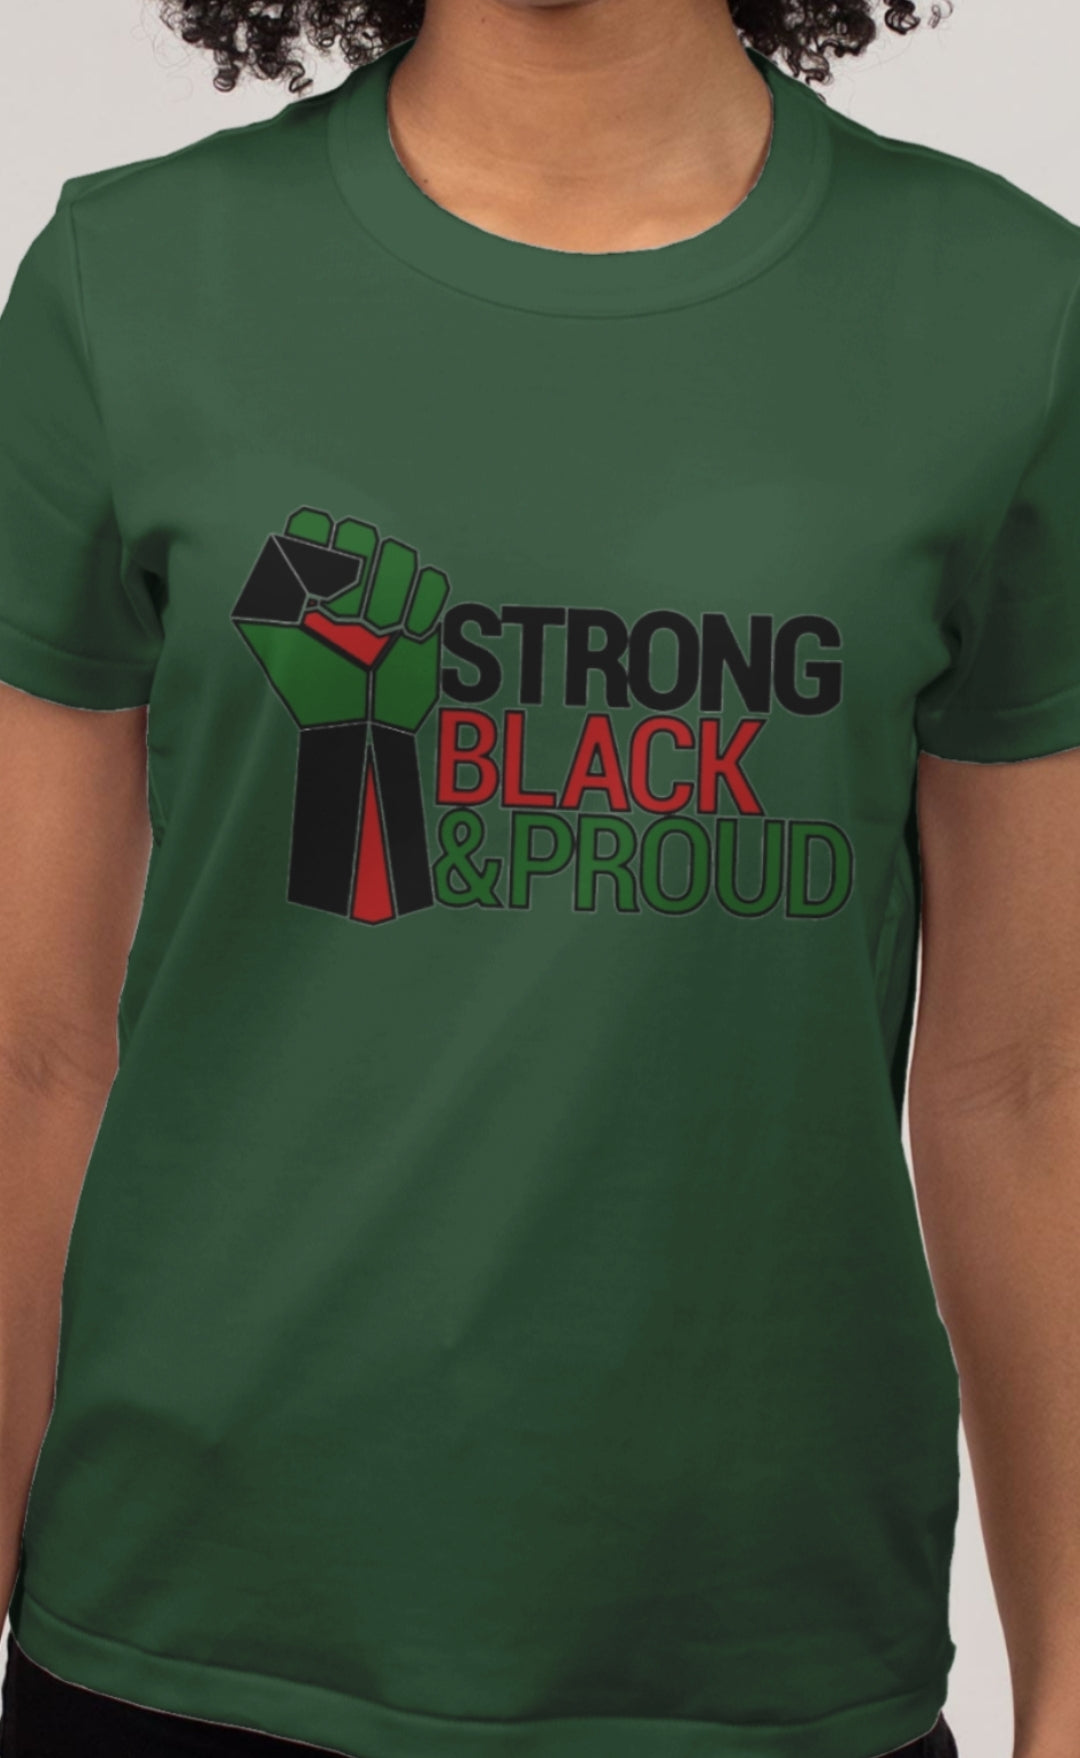 Strong Black & Proud